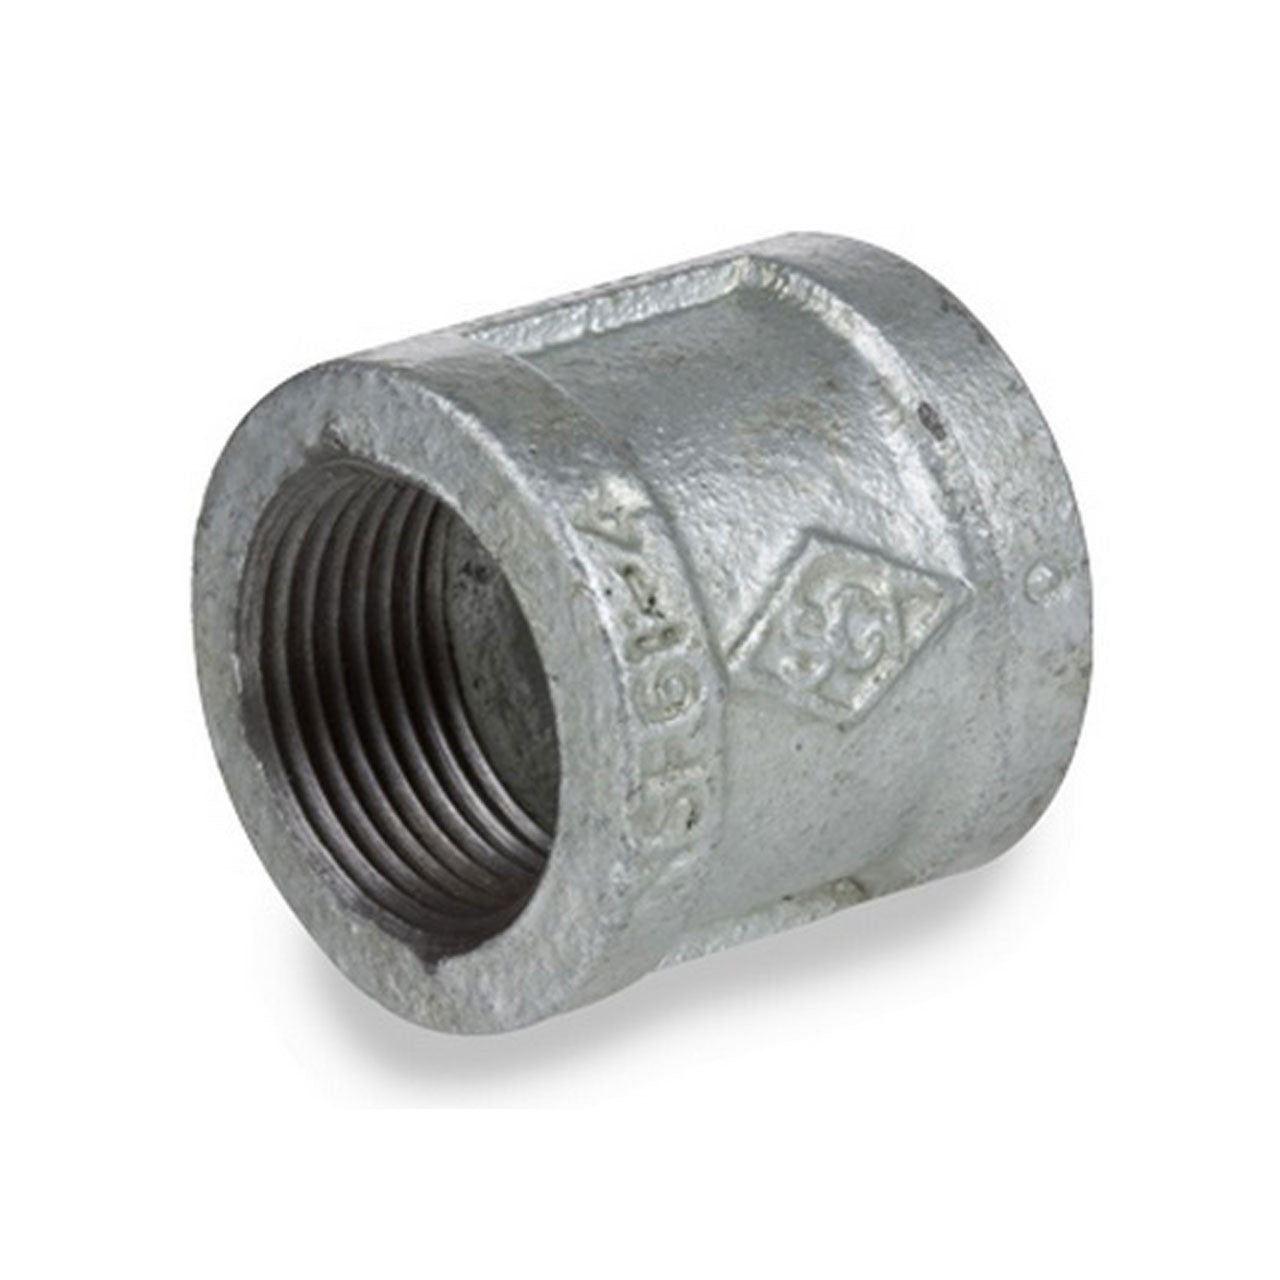 Banded Coupling - Galvanized